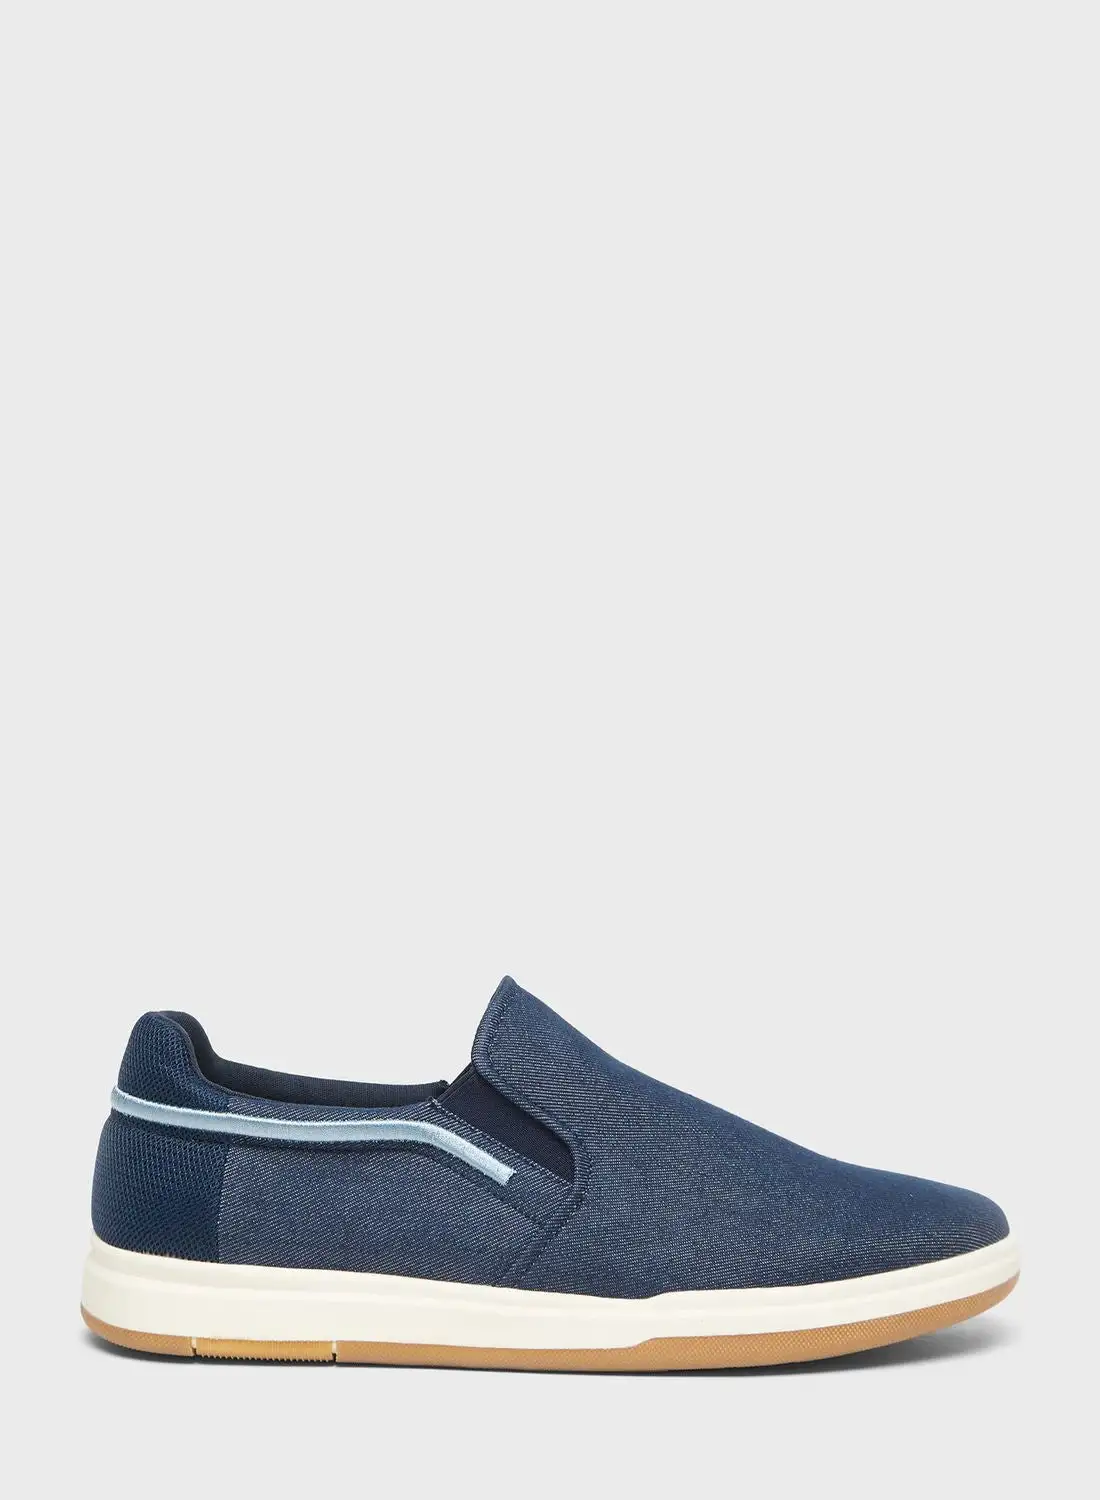 Lee Cooper Casual Slip Ons Shoes